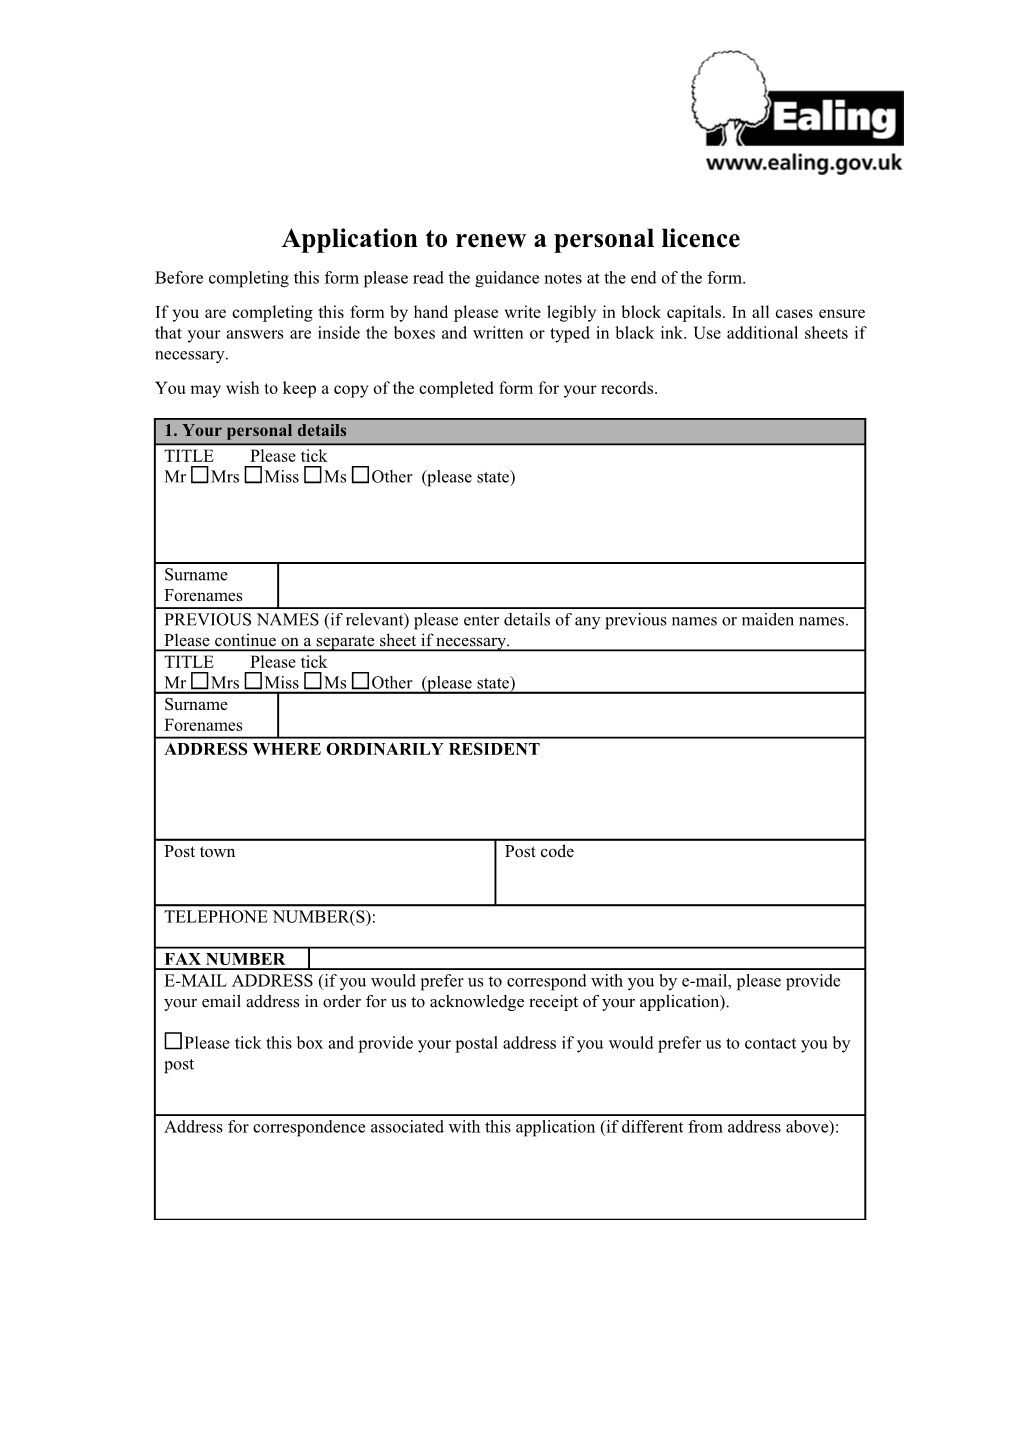 Application to Renew a Personal Licence